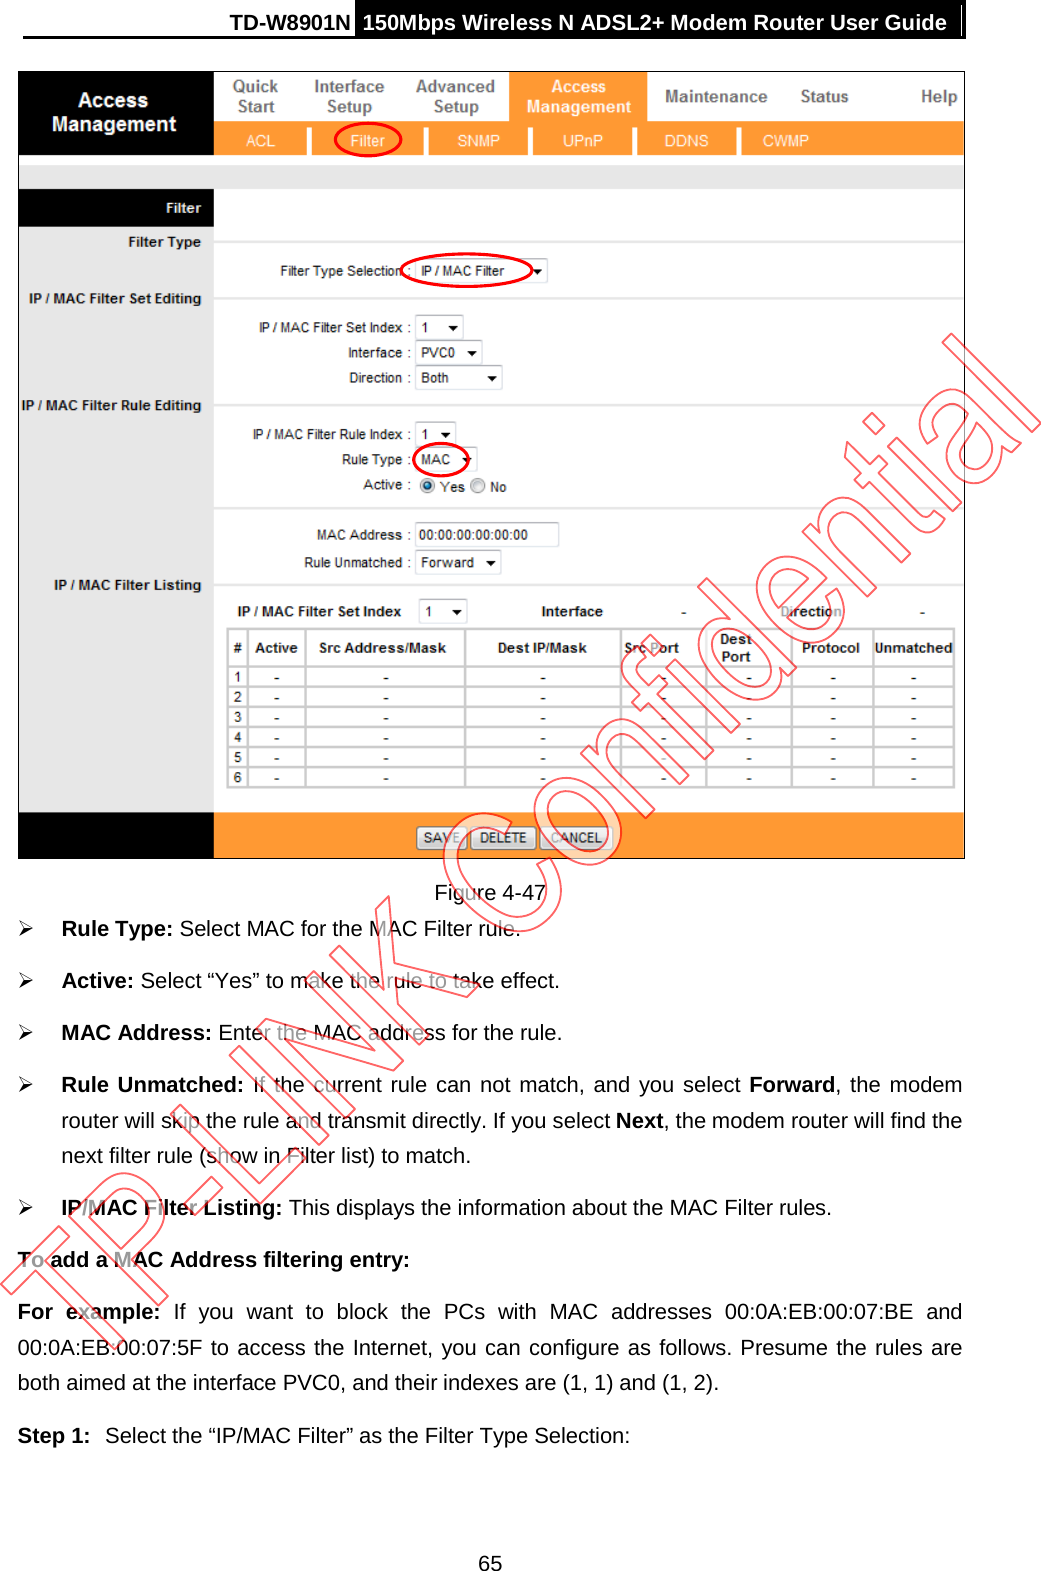 TD-W8901N 150Mbps Wireless N ADSL2+ Modem Router User Guide   Figure 4-47  Rule Type: Select MAC for the MAC Filter rule.  Active: Select “Yes” to make the rule to take effect.  MAC Address: Enter the MAC address for the rule.  Rule Unmatched: If the current rule can not match, and you select Forward, the modem router will skip the rule and transmit directly. If you select Next, the modem router will find the next filter rule (show in Filter list) to match.  IP/MAC Filter Listing: This displays the information about the MAC Filter rules. To add a MAC Address filtering entry: For example: If you want to block the PCs with MAC addresses 00:0A:EB:00:07:BE and 00:0A:EB:00:07:5F to access the Internet, you can configure as follows. Presume the rules are both aimed at the interface PVC0, and their indexes are (1, 1) and (1, 2). Step 1: Select the “IP/MAC Filter” as the Filter Type Selection:   65 